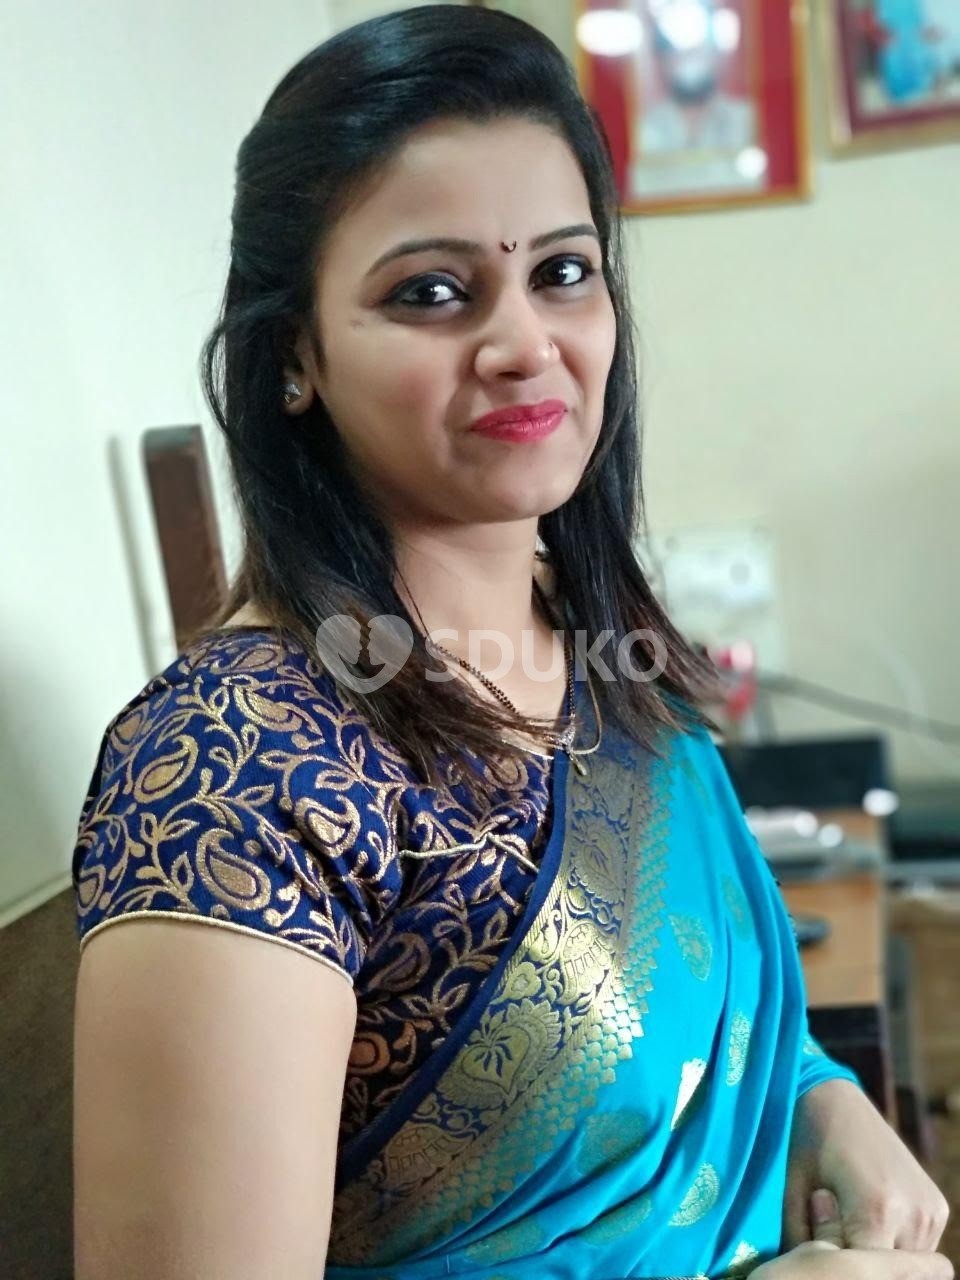 Rajajinagar..low price 🥰 100% SAFE AND SECURE TODAY LOW PRICE UNLIMITED ENJOY HOT COLLEGE GIRL HOUSEWIFE AUNTIES AVAI